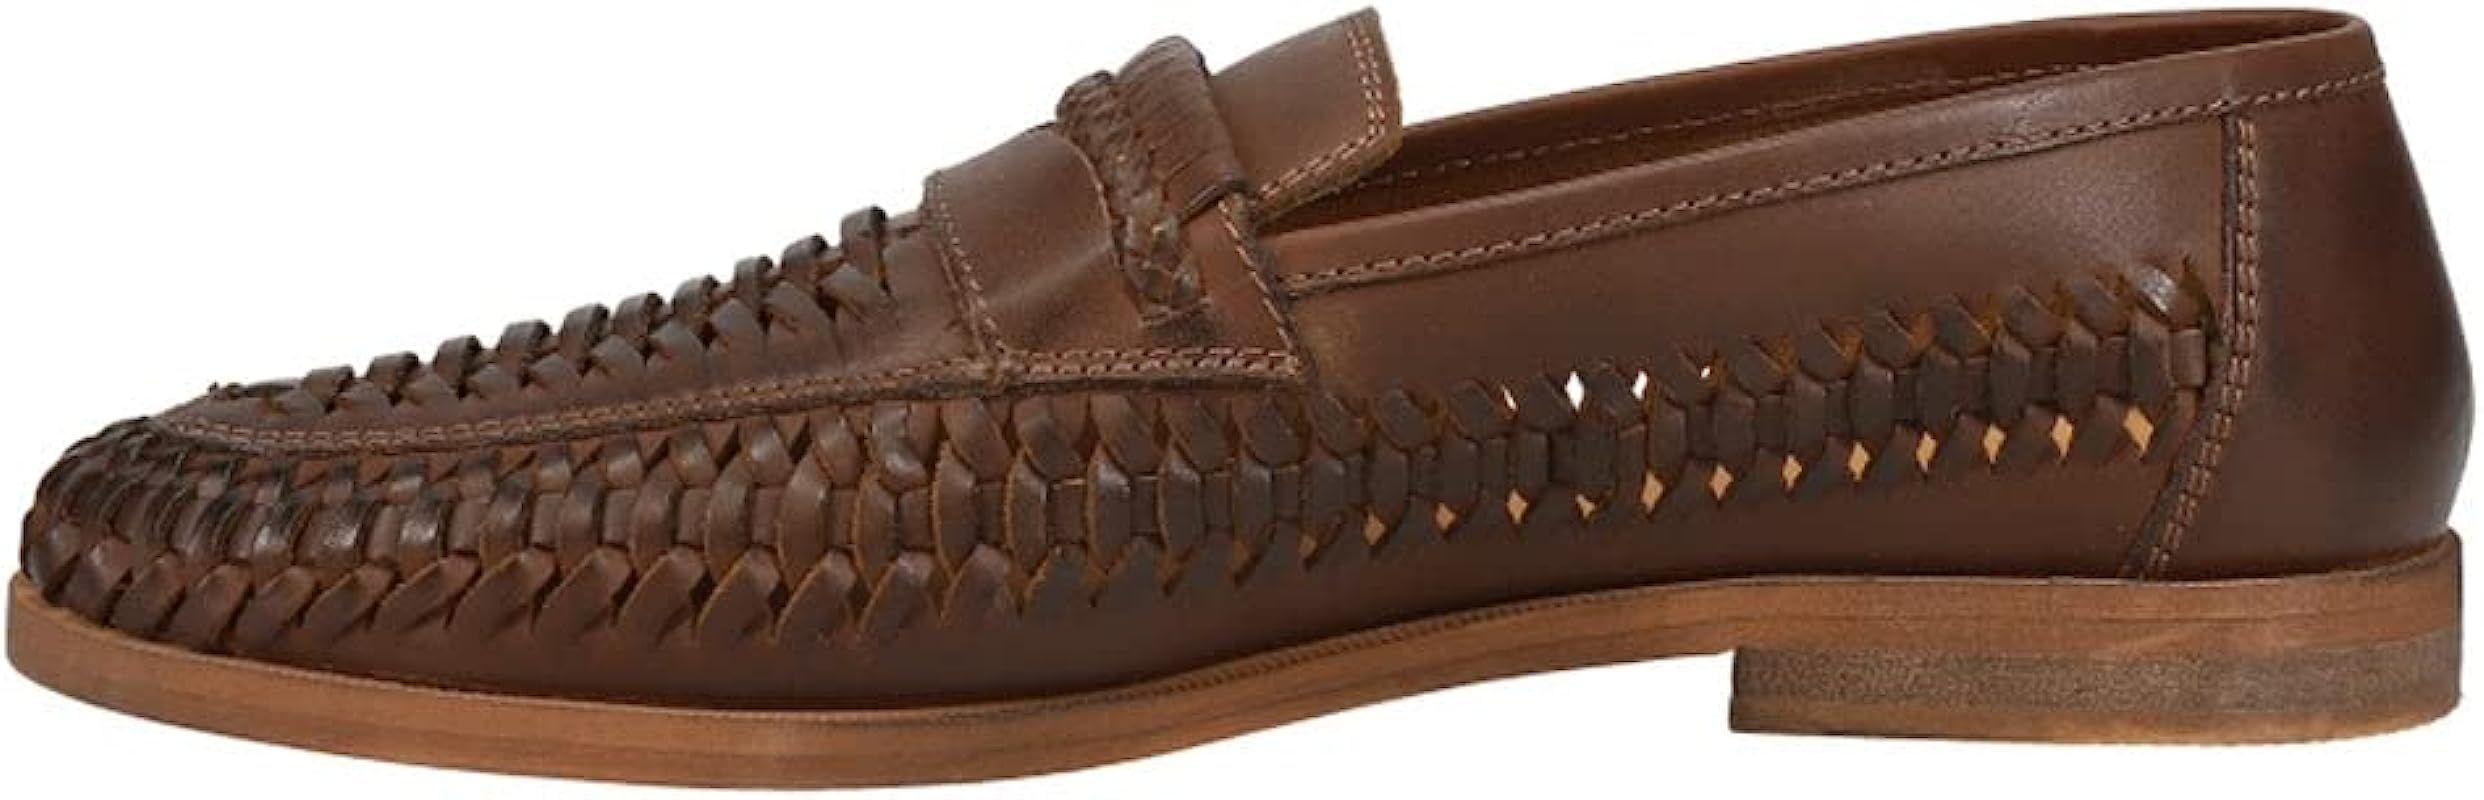 Rustic Asphalt Men's Pointy End Genuine Woven Leather Slip On Penny Loafer | Amazon (US)